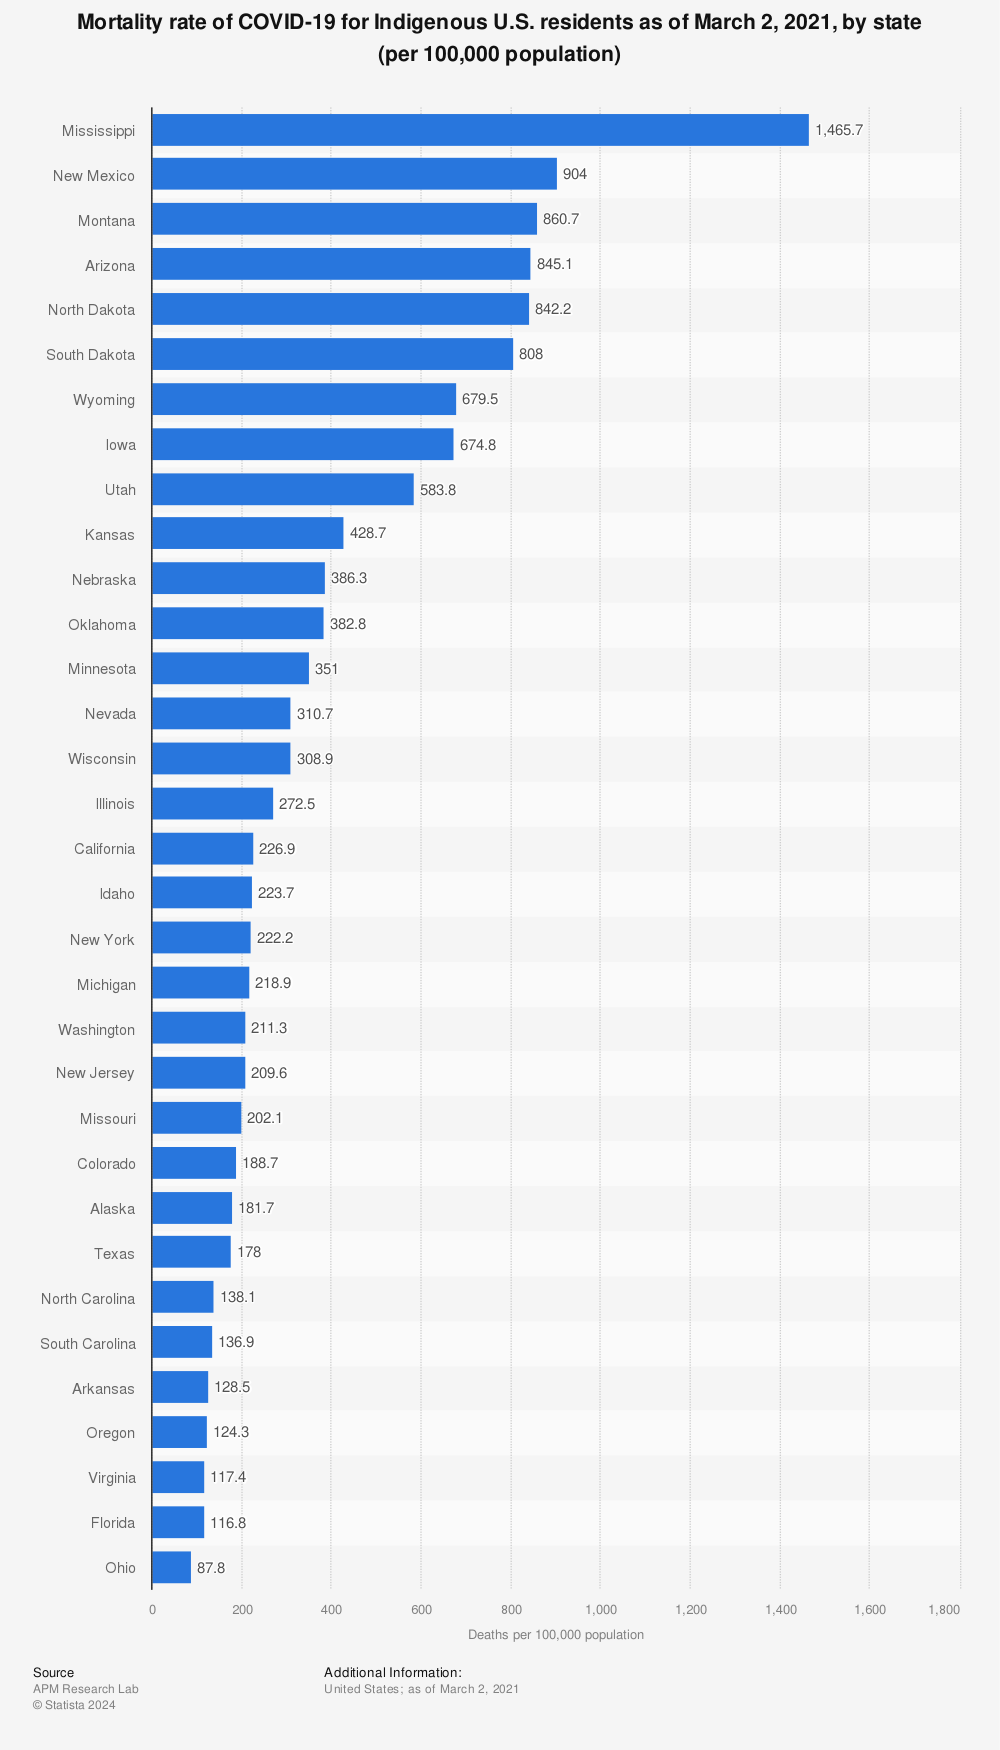 Statistic: Mortality rate of COVID-19 for Indigenous U.S. residents as of March 2, 2021, by state (per 100,000 population) | Statista